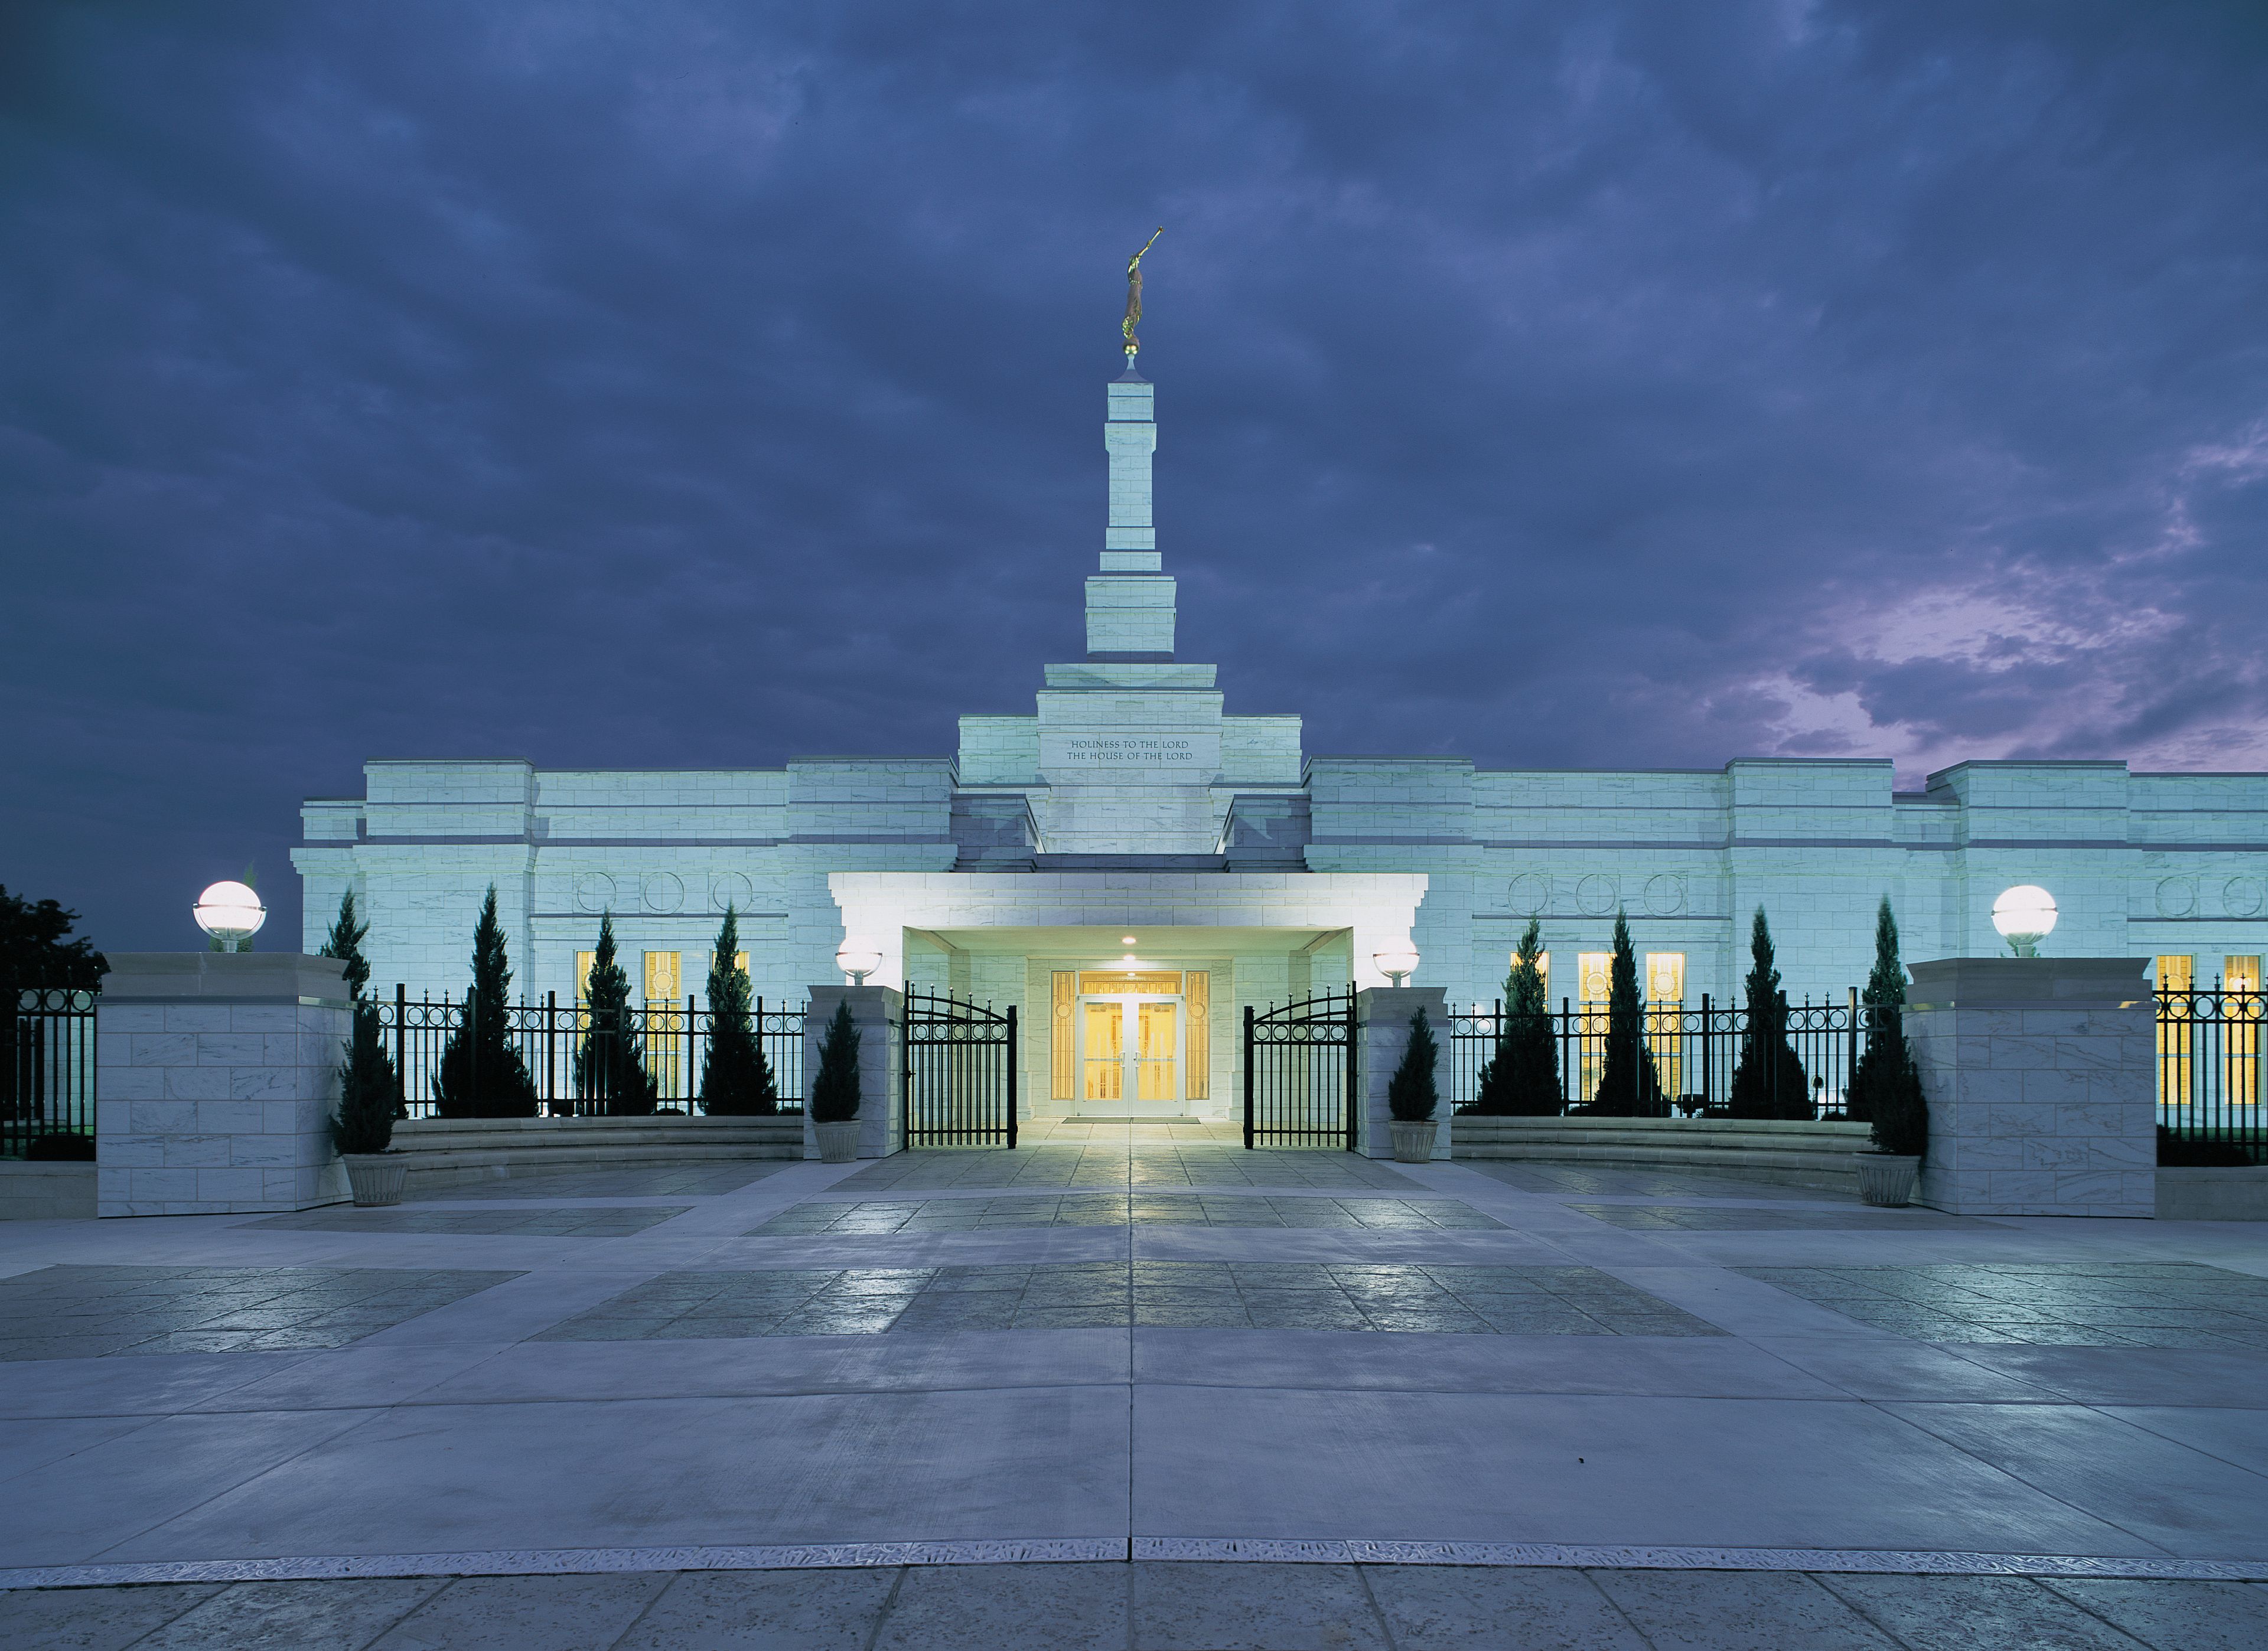 The Oklahoma City Oklahoma Temple in the evening, including the entrance and grounds.